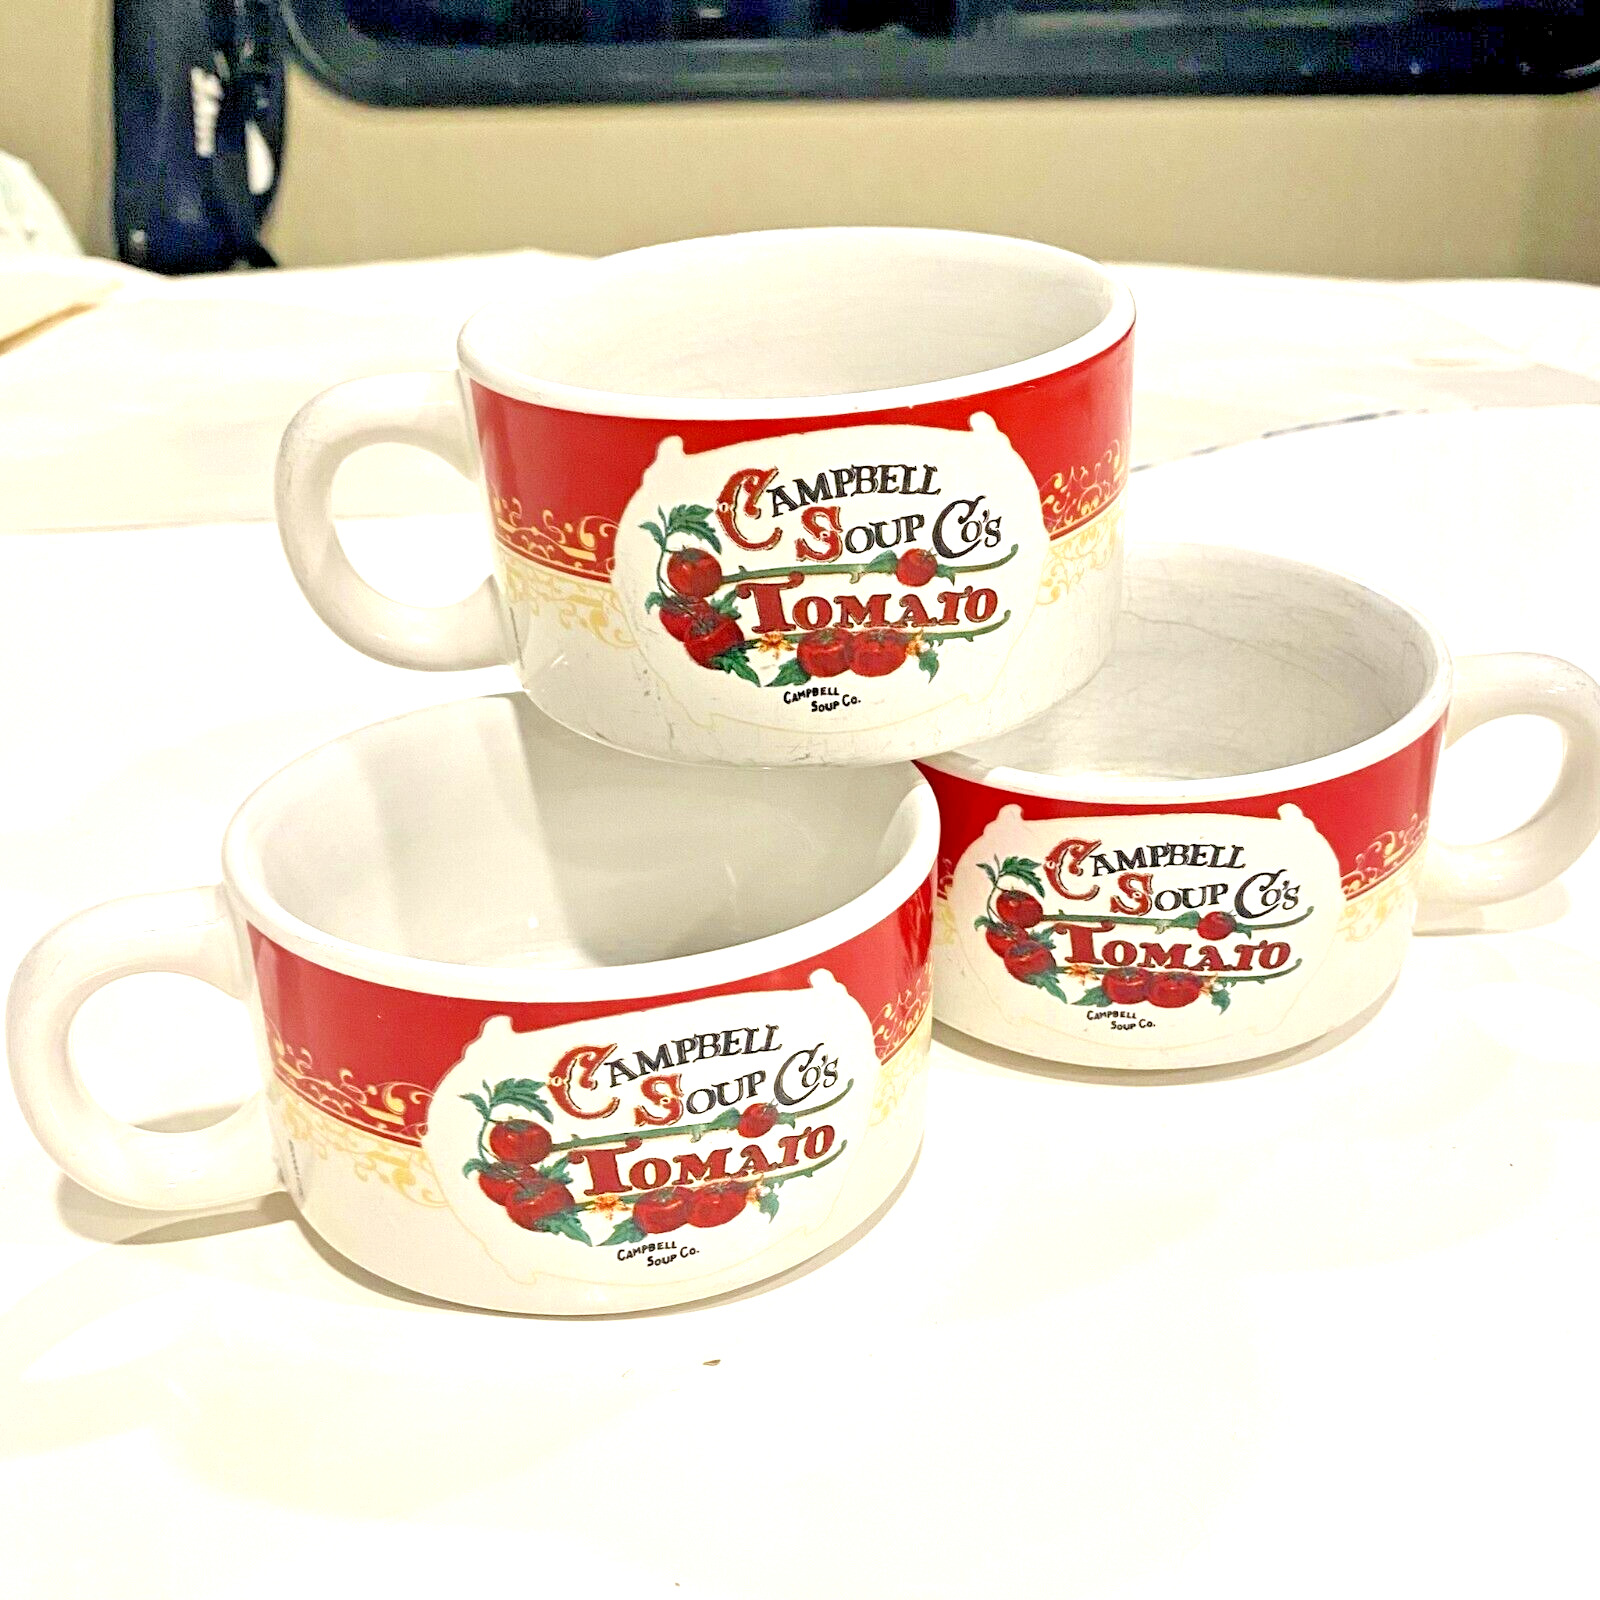 Lot of 3 Vintage Cambell’s Soup Mugs